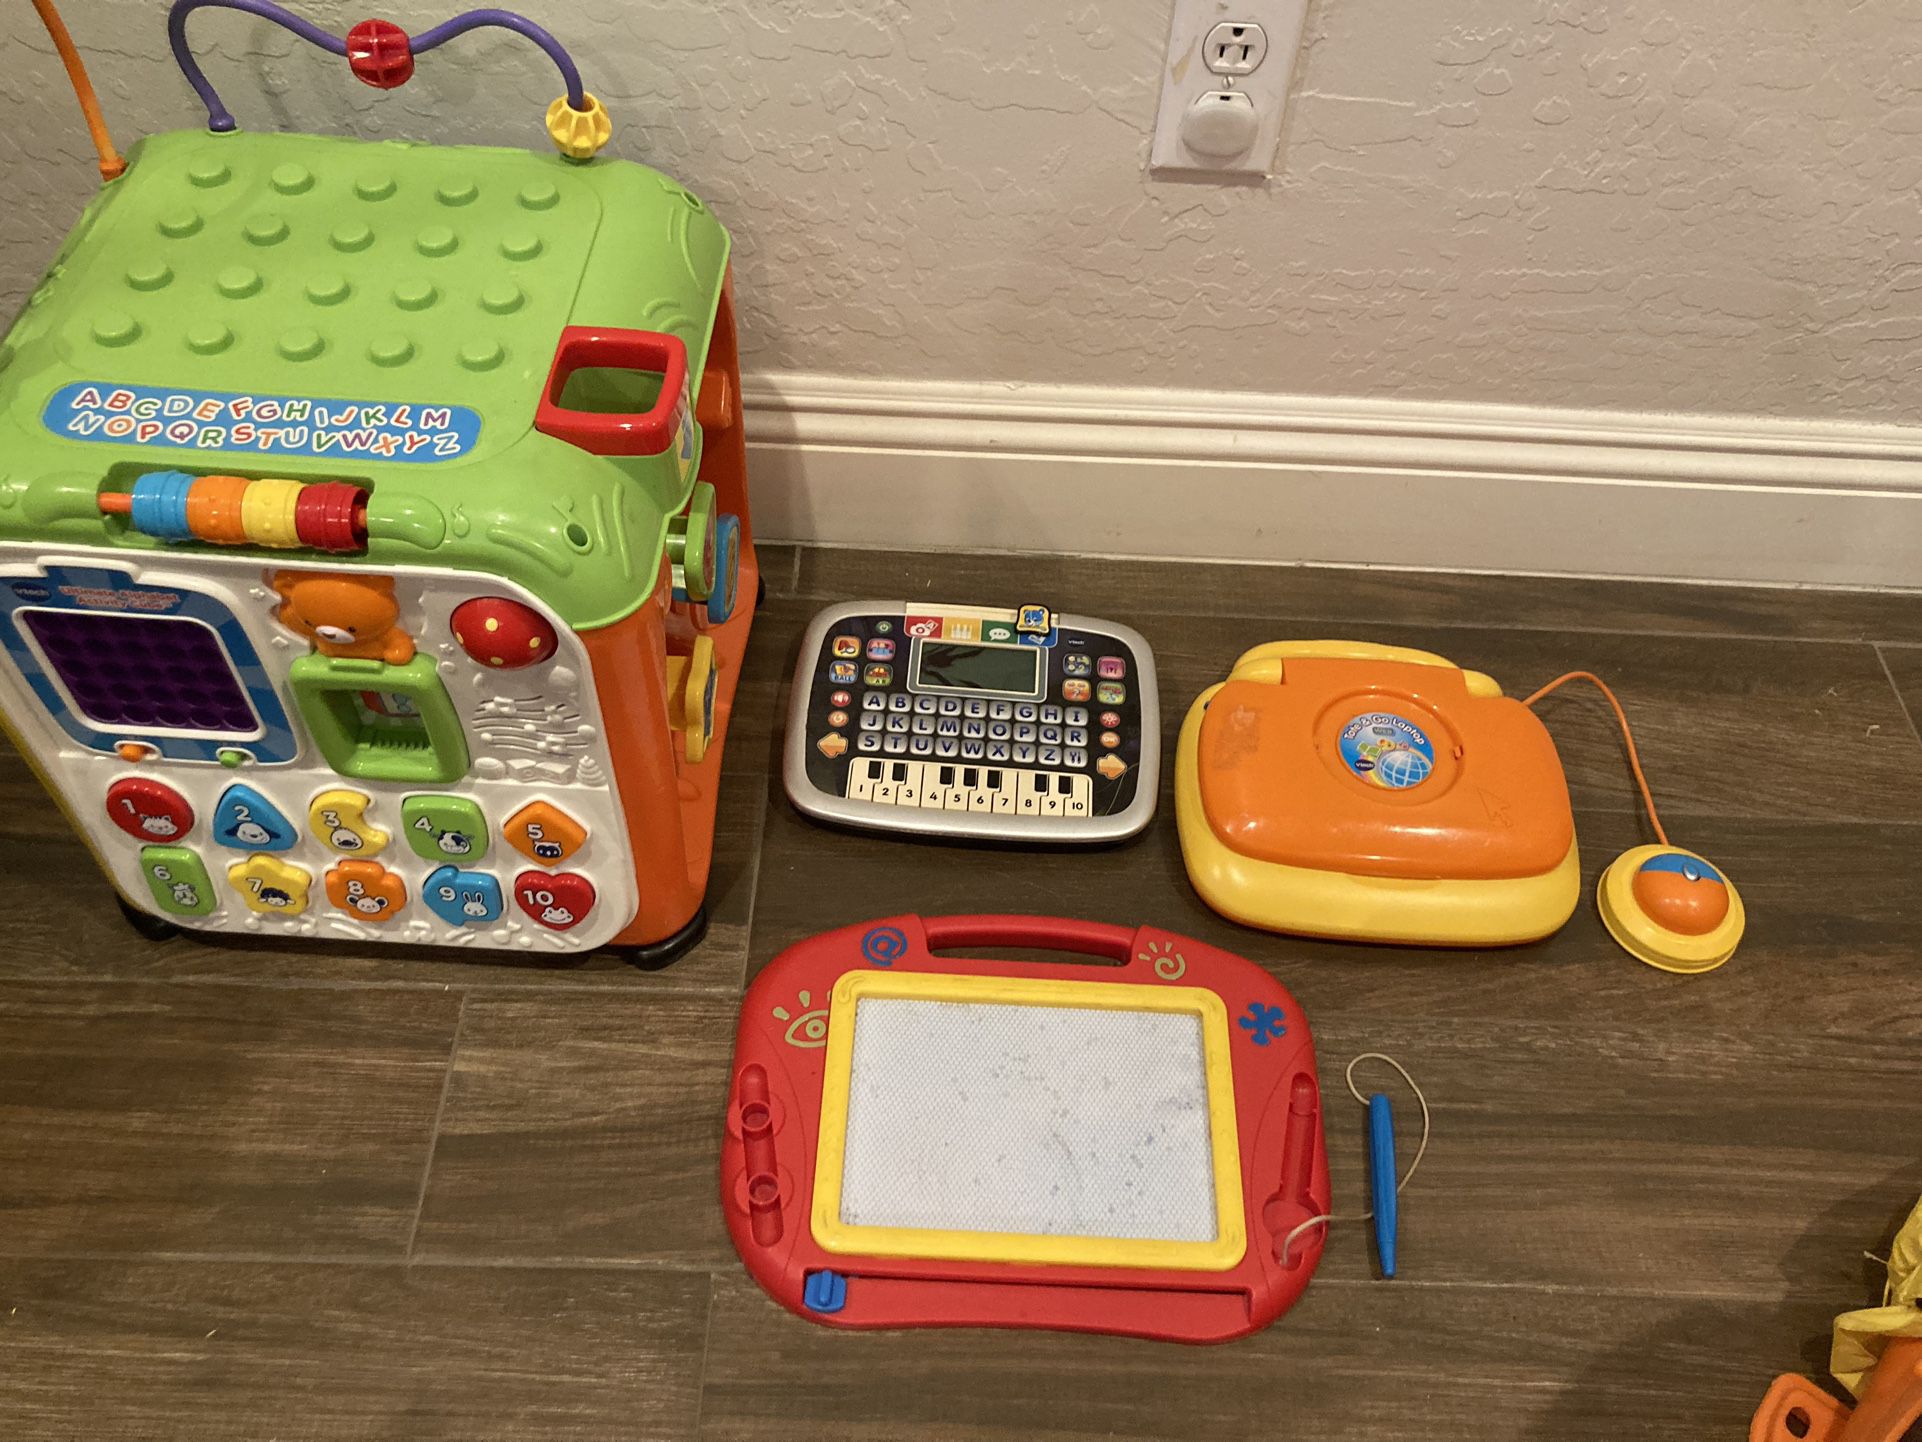 V-tech Digital Educational Baby Toy In Peoria